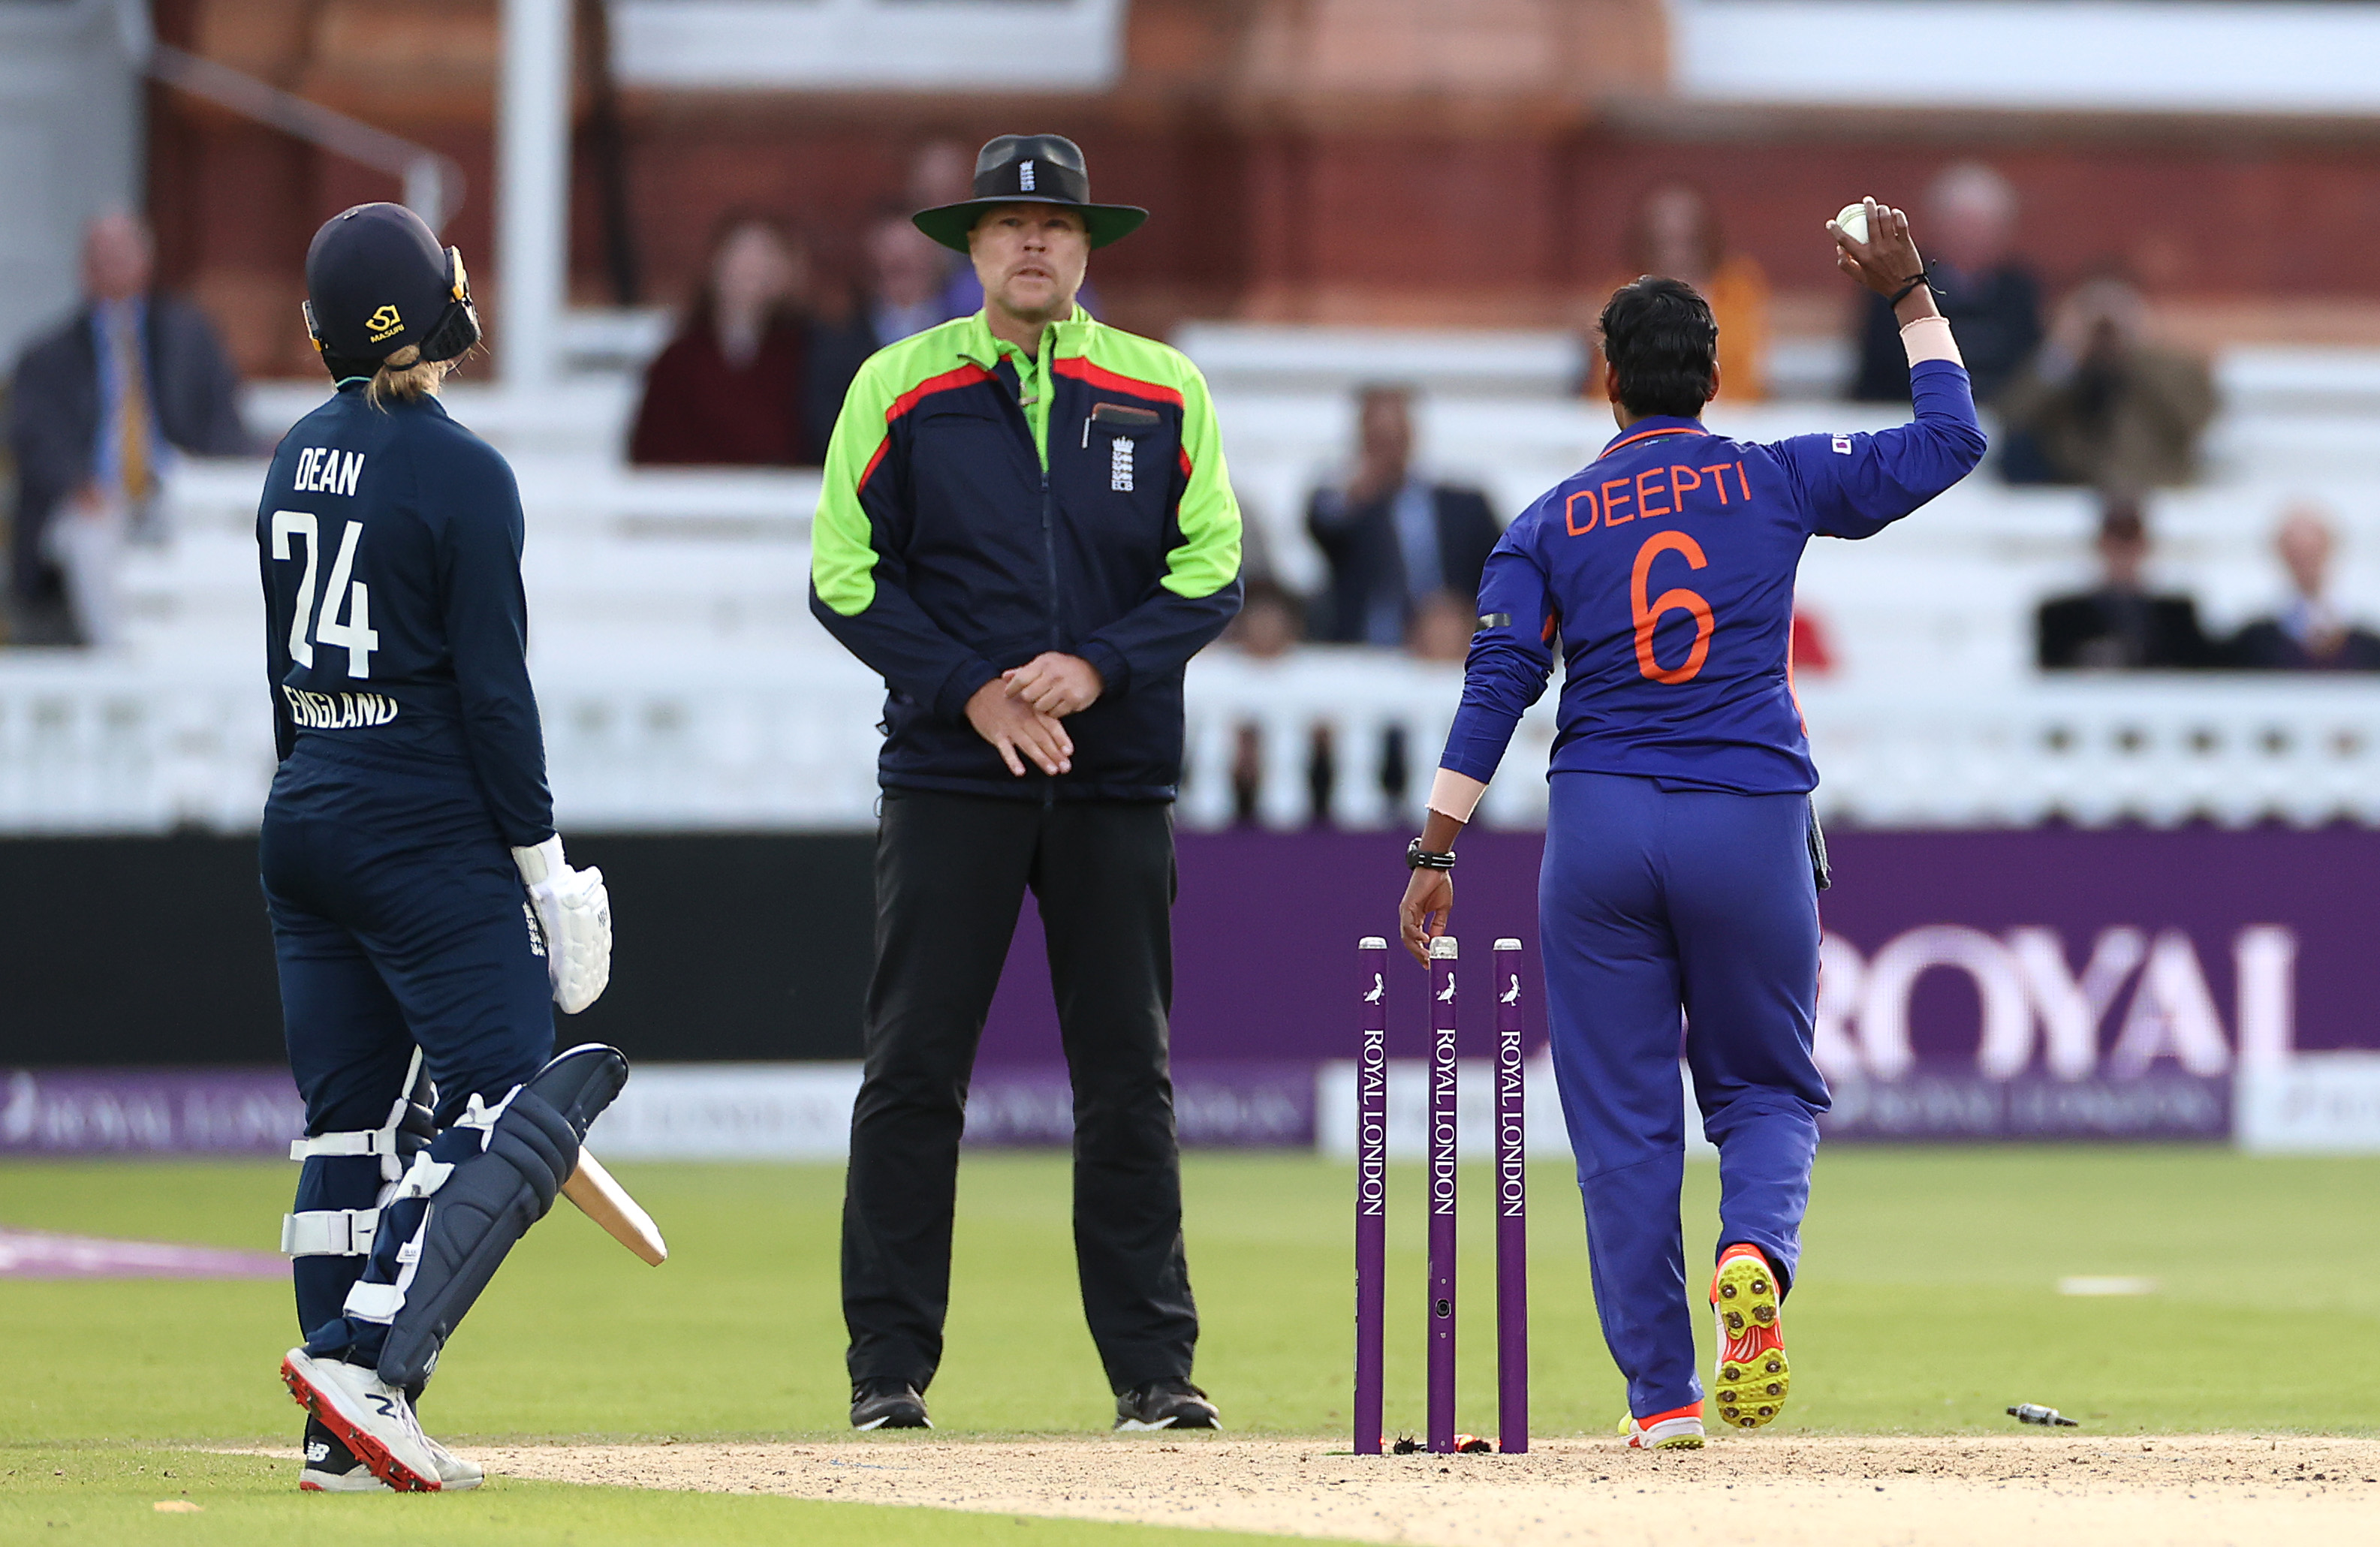 Charlie Dean of England reacts after being run out by Deepti Sharma of India to claim victory during the 3rd Royal London ODI between England Women and India Women at Lord's Cricket Ground on September 24, 2022 in London, England. (Photo by Ryan Pierse/Getty Images)